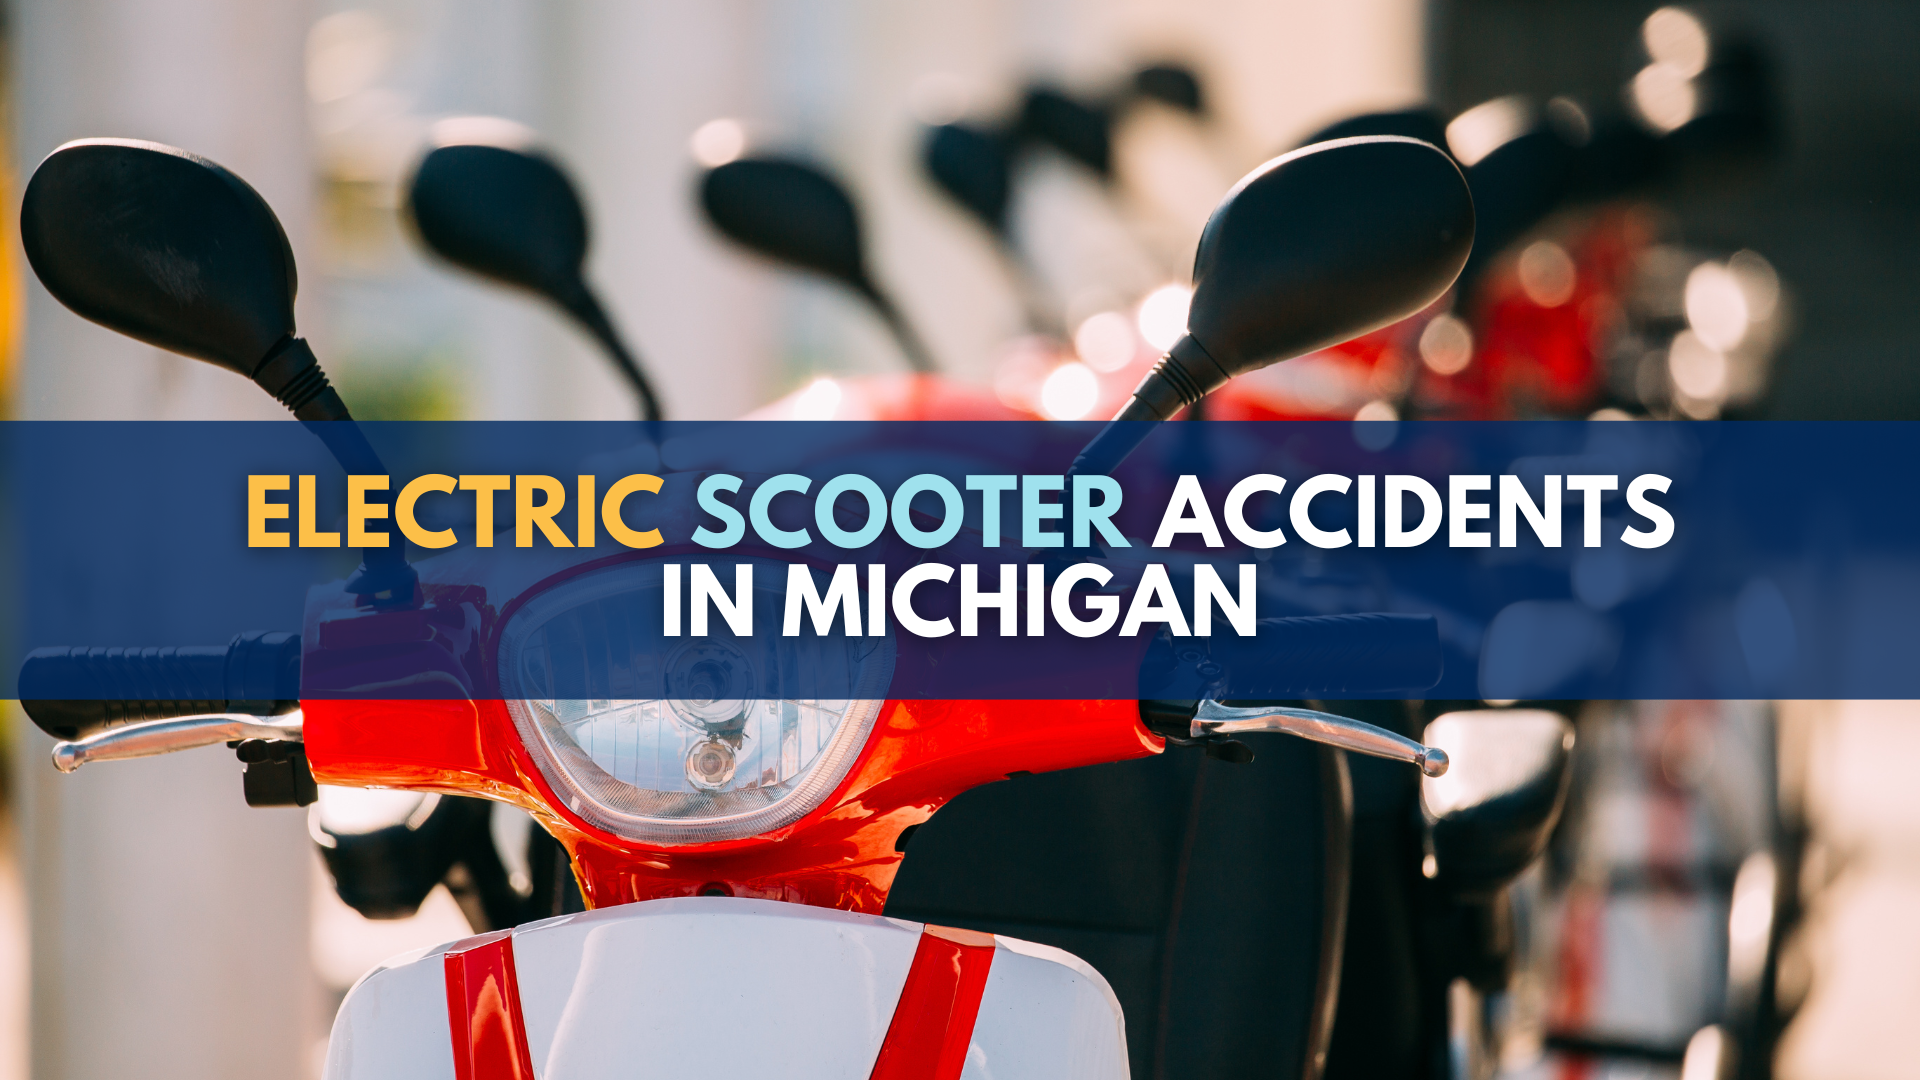 Electric scooter accidents in Michigan